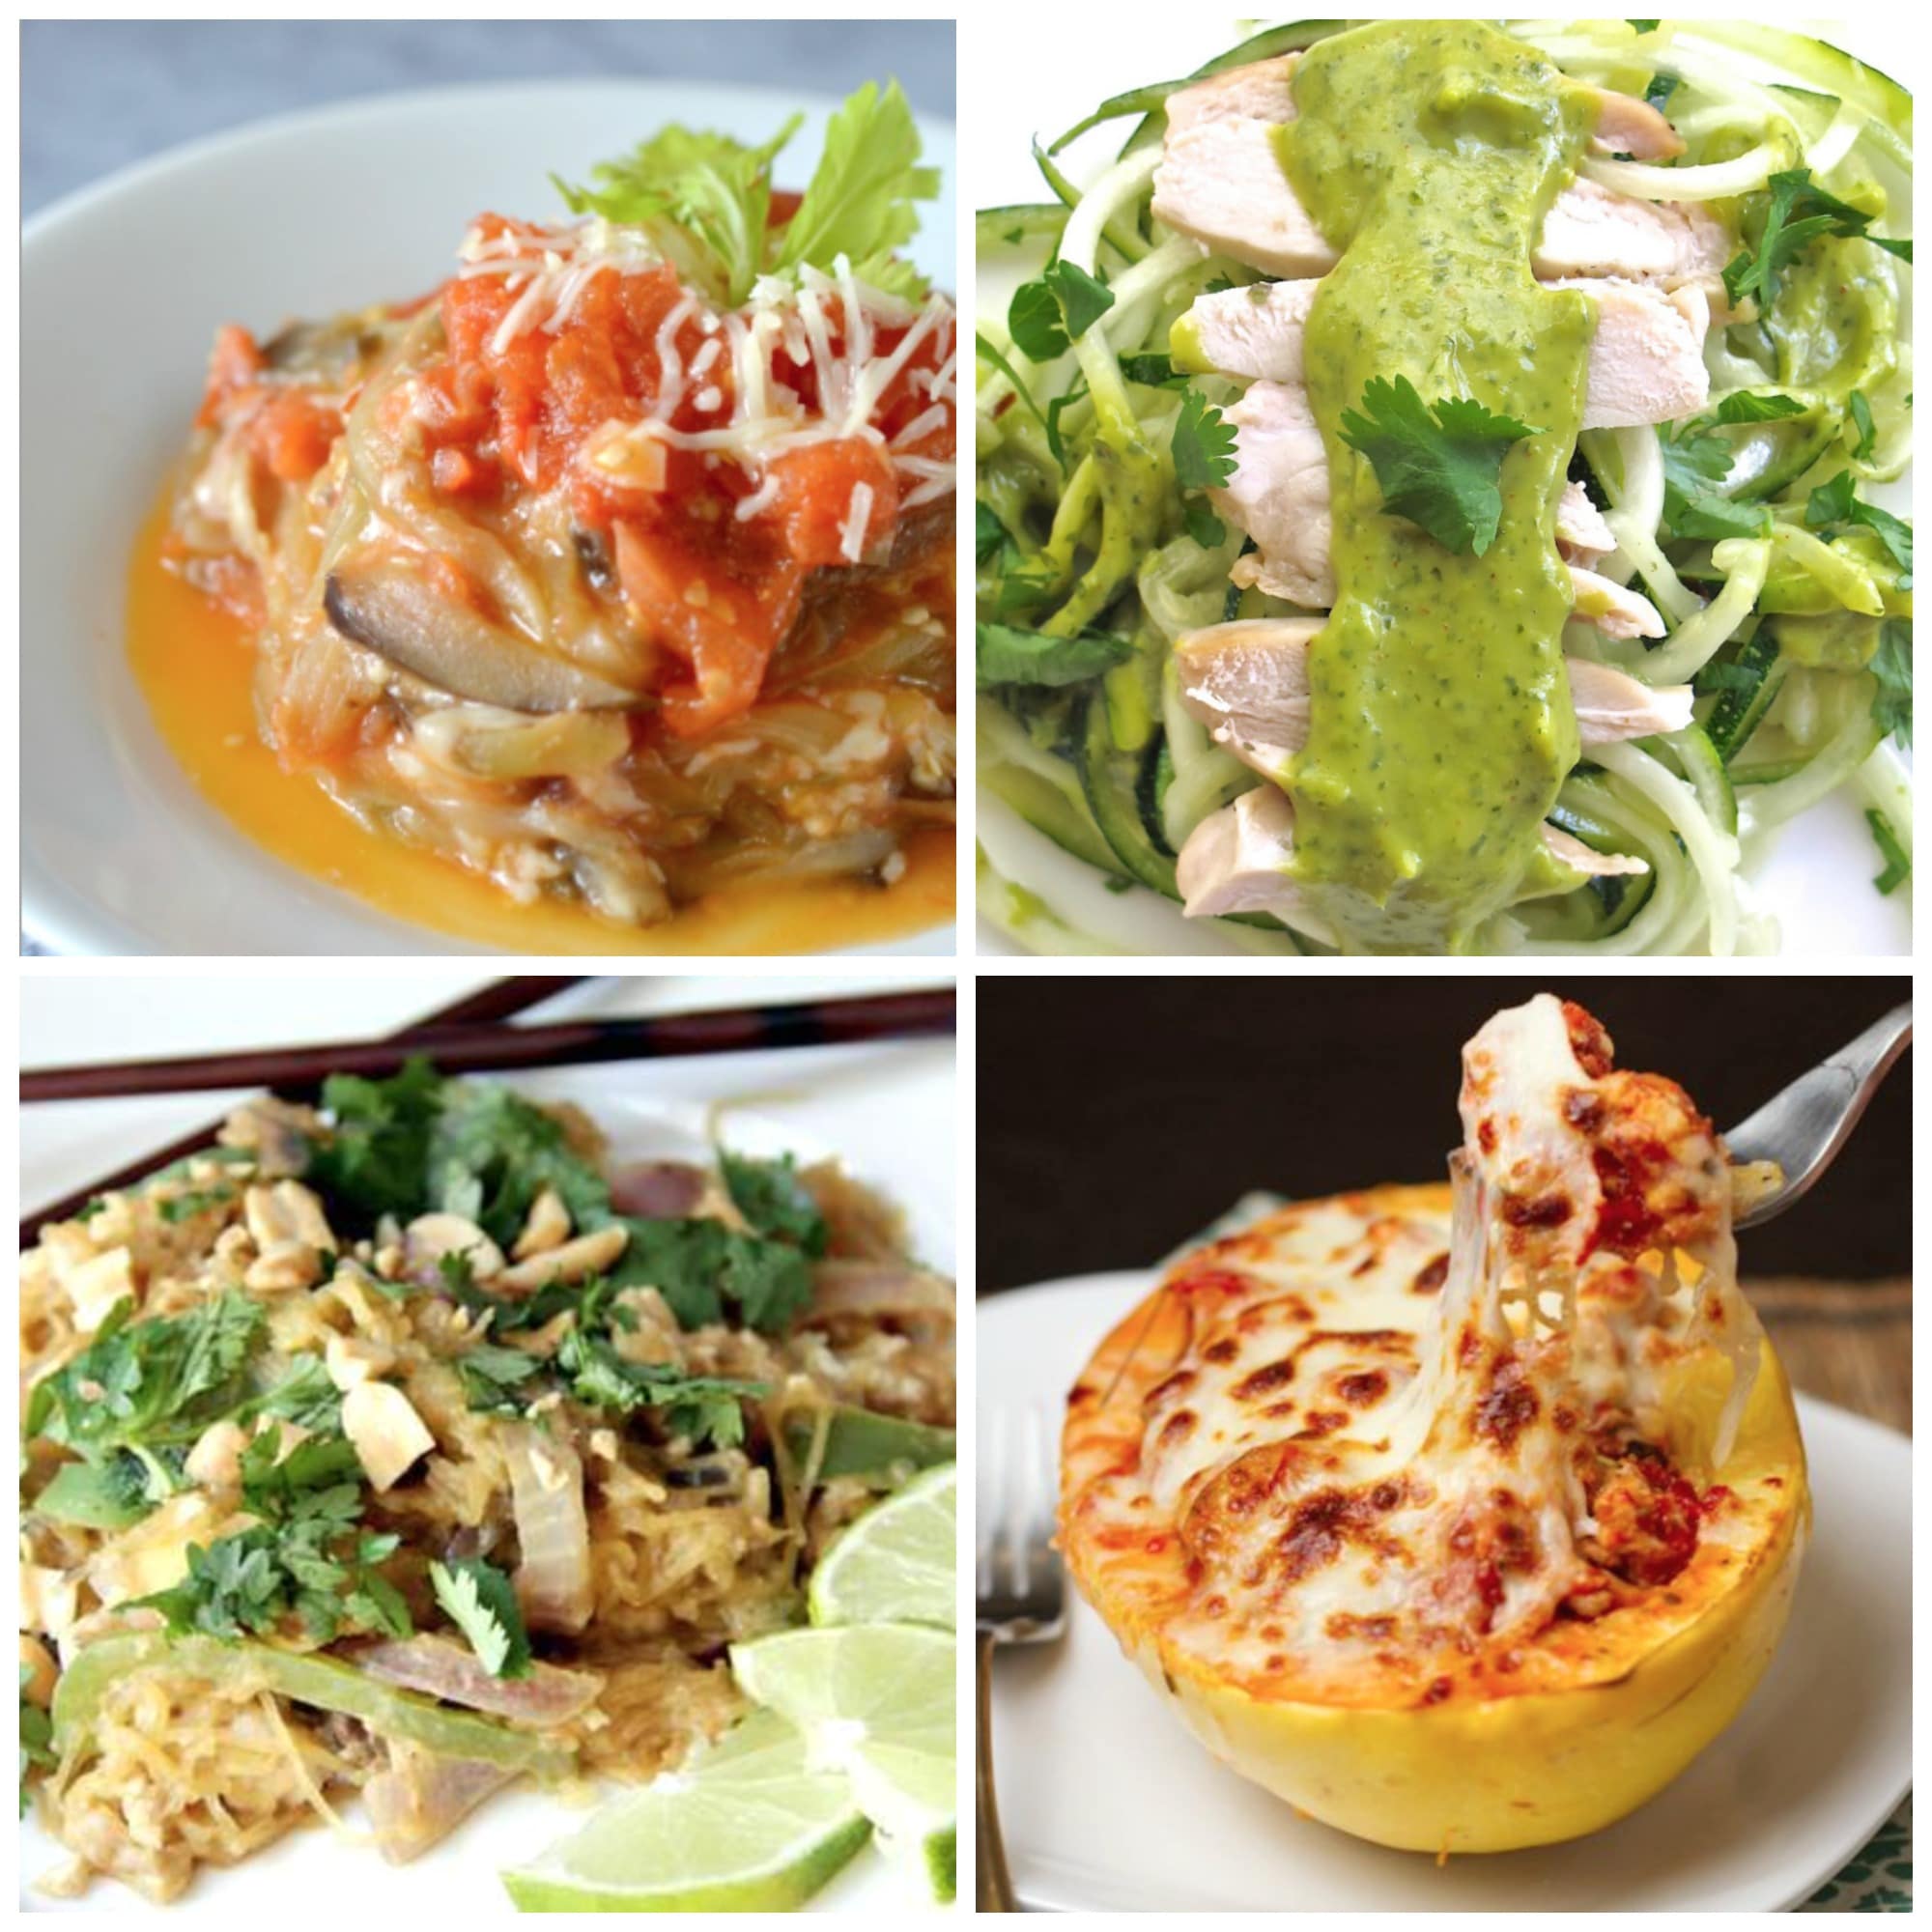 Collage of 4 recipes using zoodles and other vegetables to replace pasta for healthy cooking.